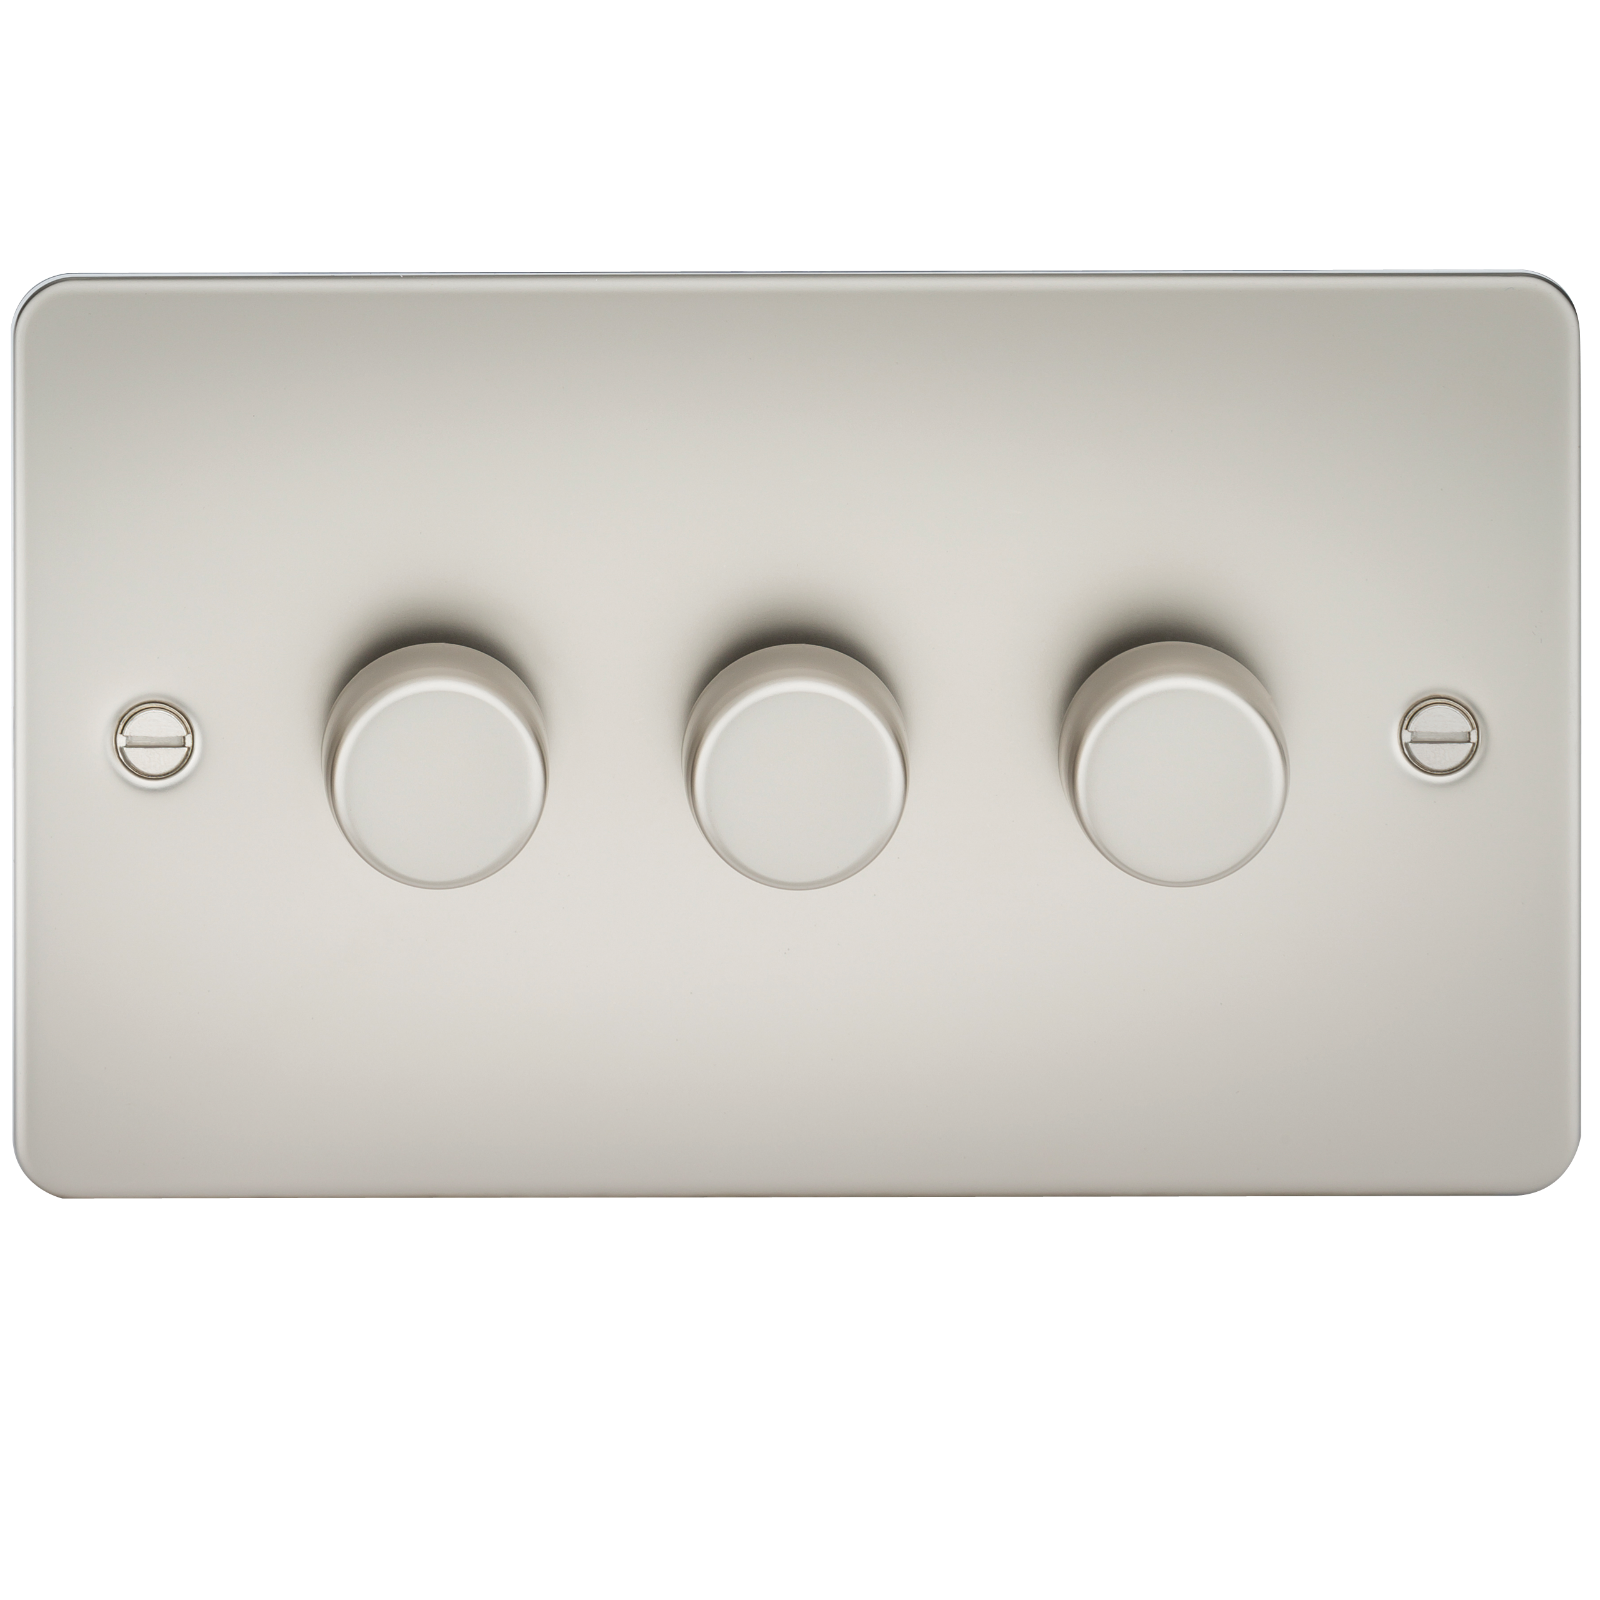 Flat Plate 3G 2 Way Dimmer 60-400W - Pearl - FP2163PL 